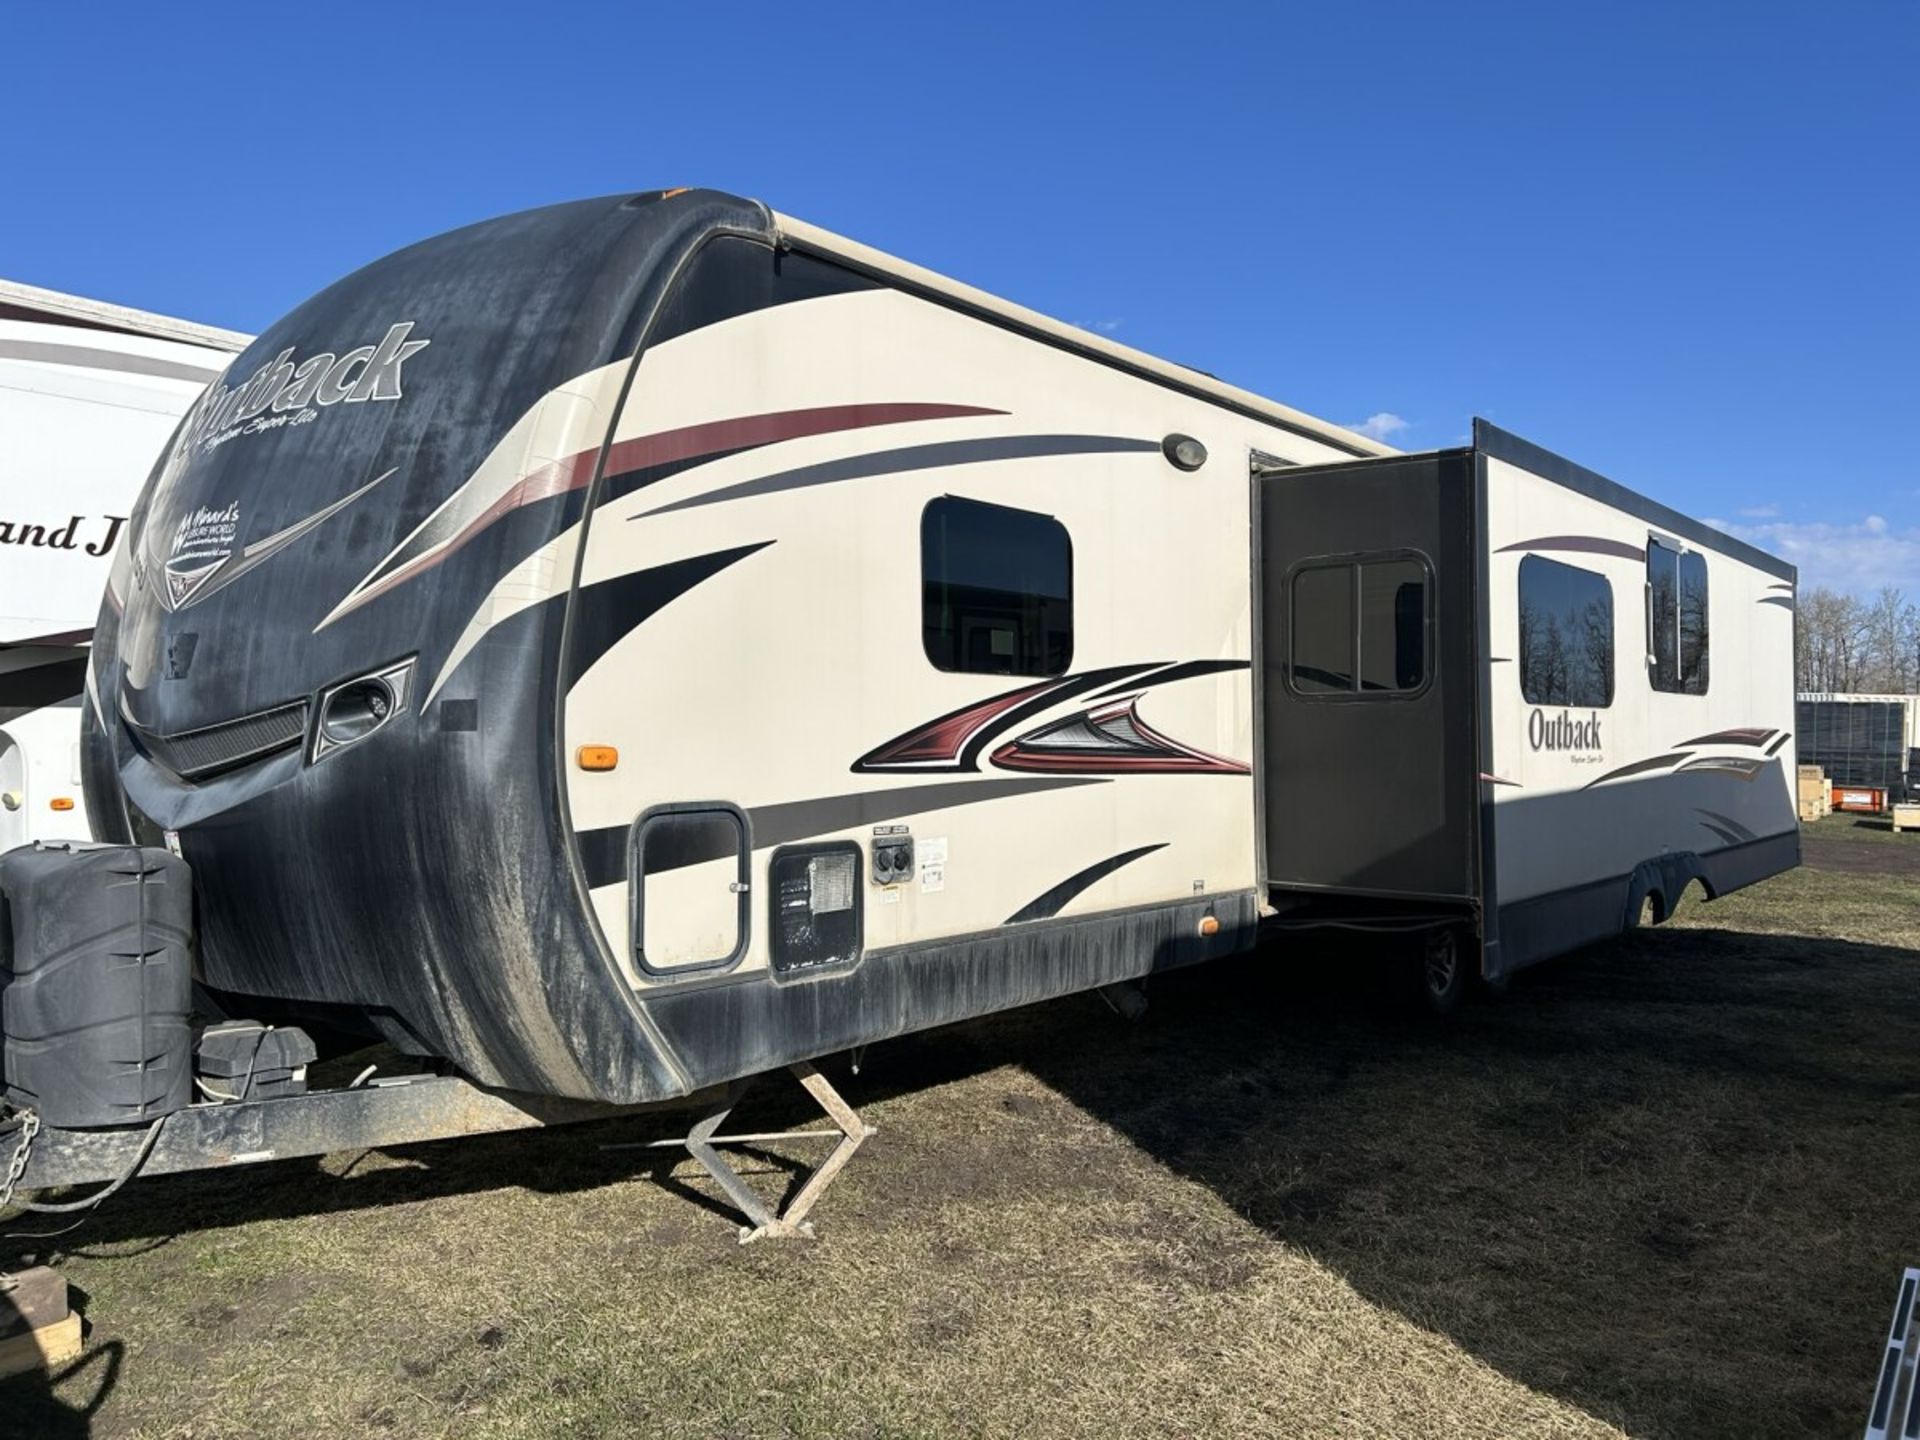 2014 OUTBACK KEYSTONE SUPER-LITE 33 FT HOLIDAY TRAILER, DOUBLE SLIDE, POWER AWNING, OUTDOOR KITCHEN, - Image 2 of 15